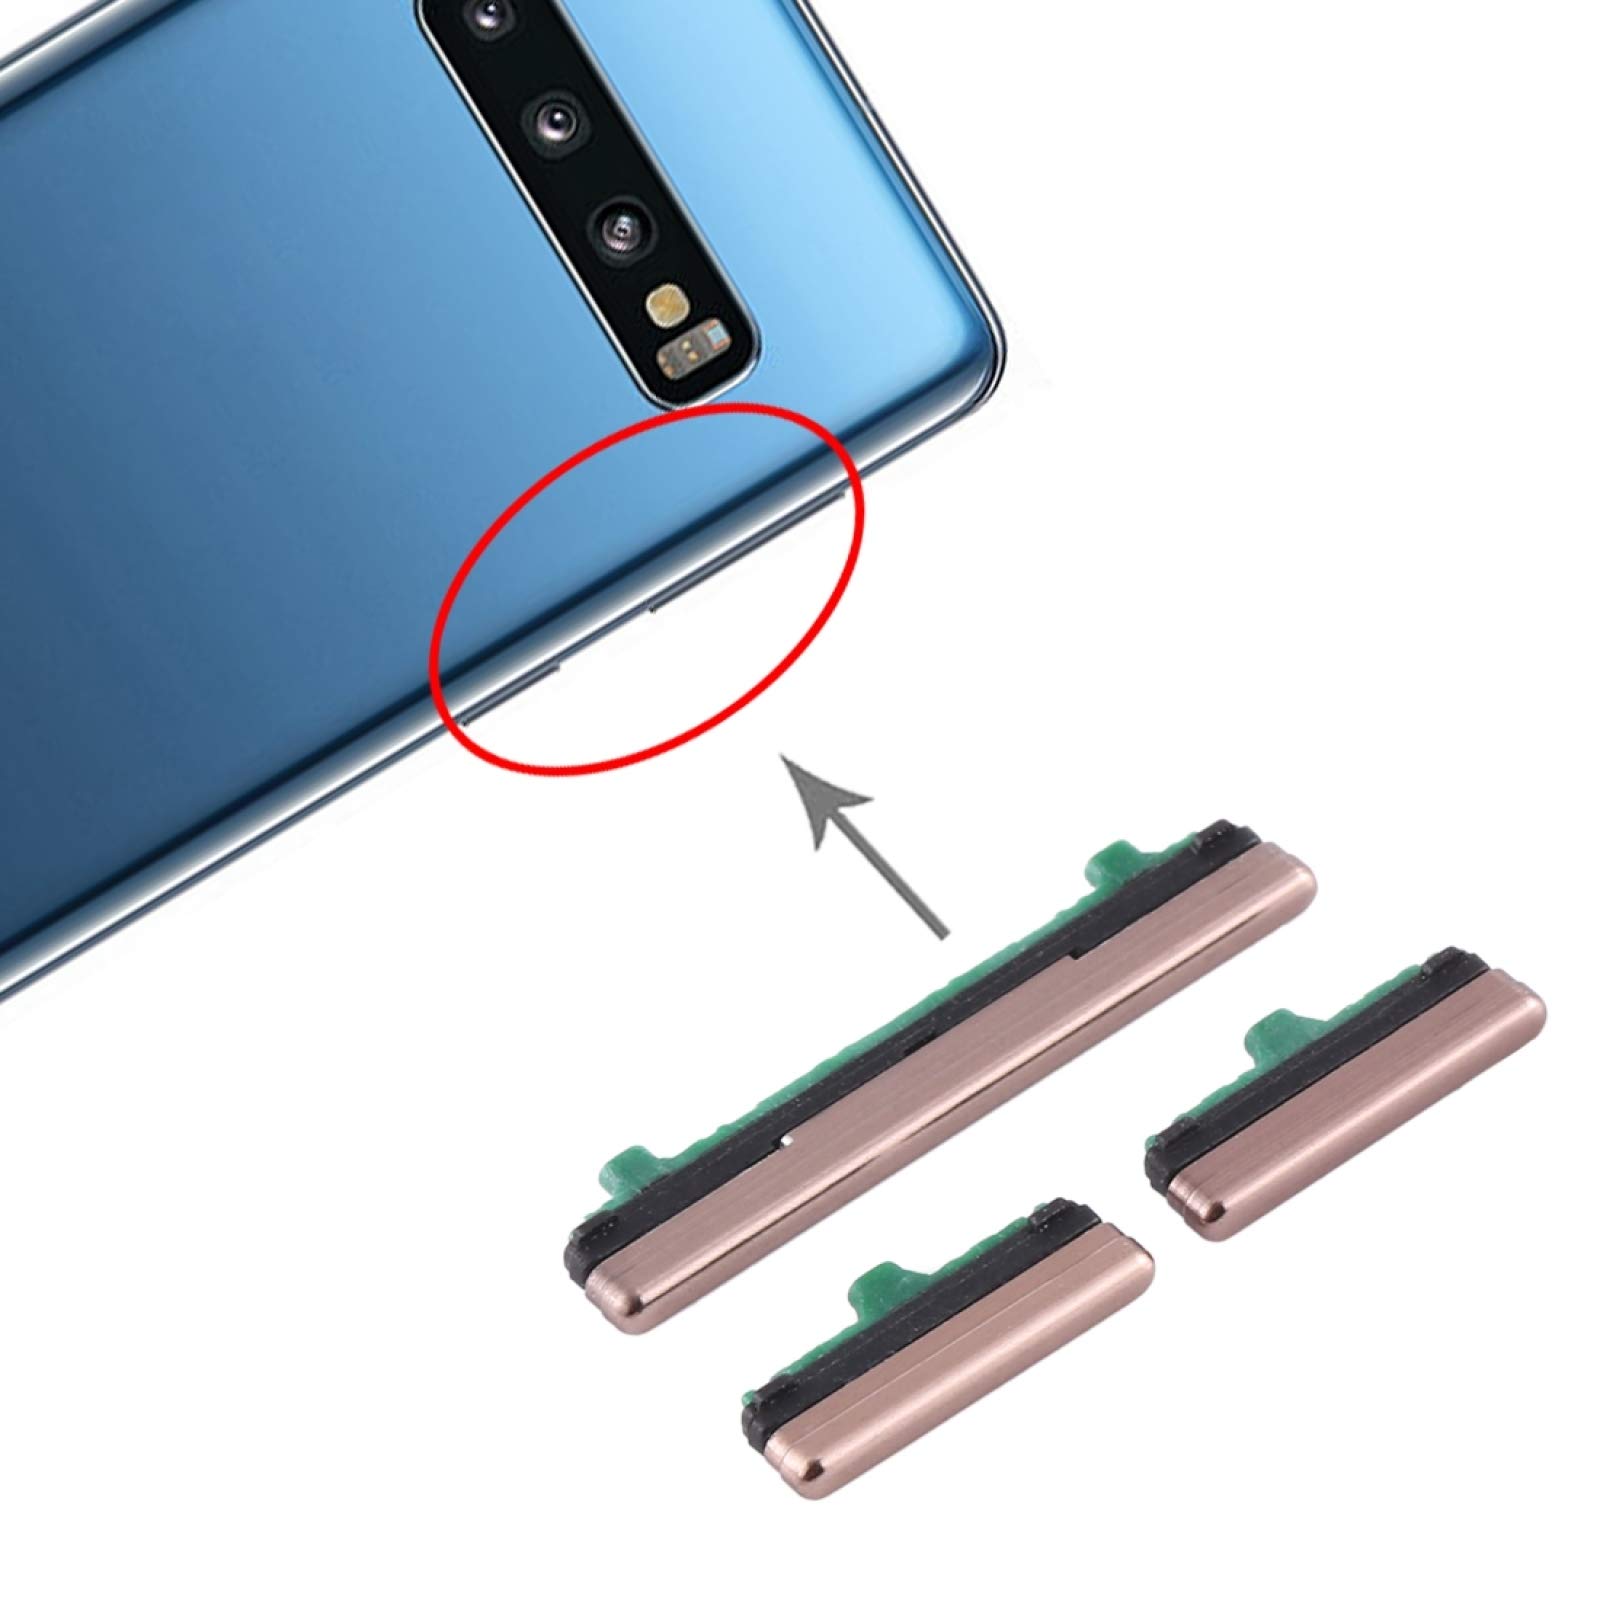 Power button on a mobile device